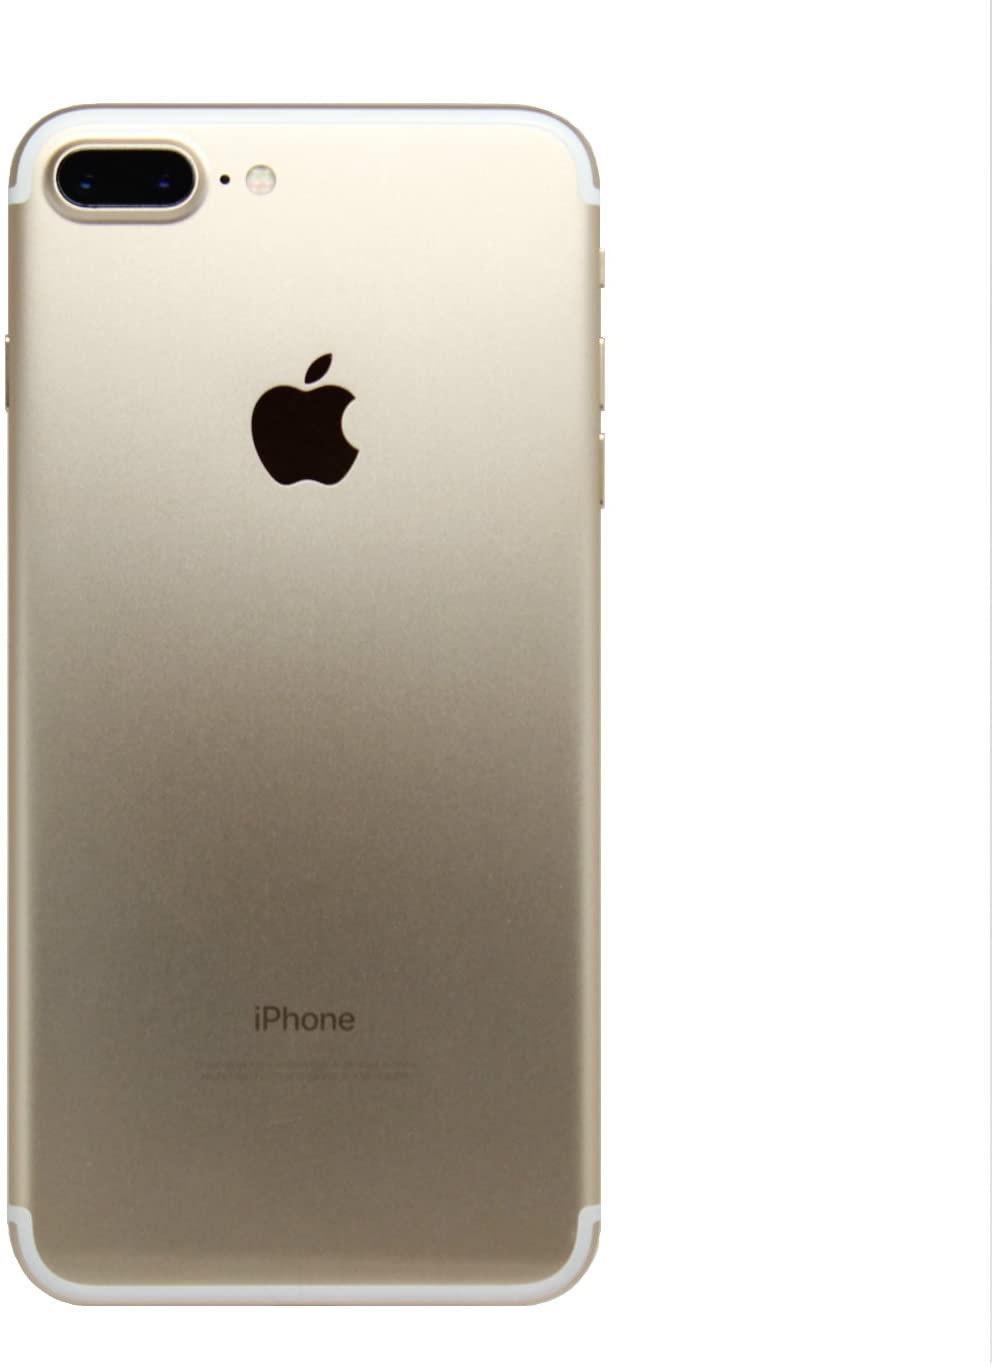 iPhone 7 Plus still worth it? Find out Price and Specifications